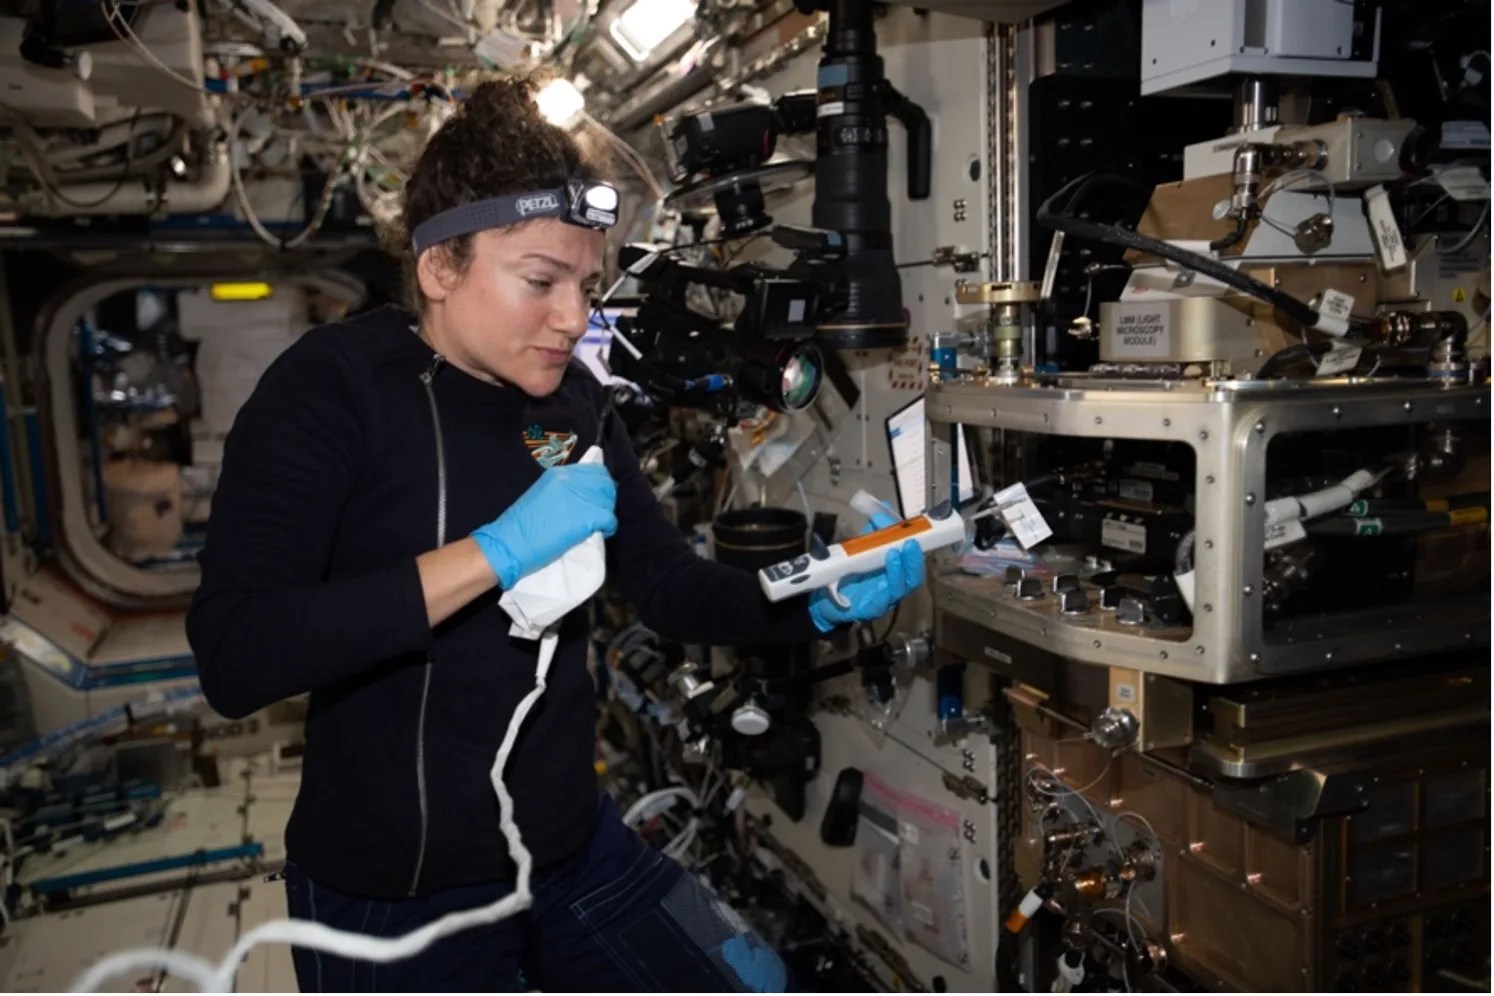 Astronaut wearing blue gloves looking at a white and orange device in her left hand while holding onto a white clothed device attached to a tether in her right hand.